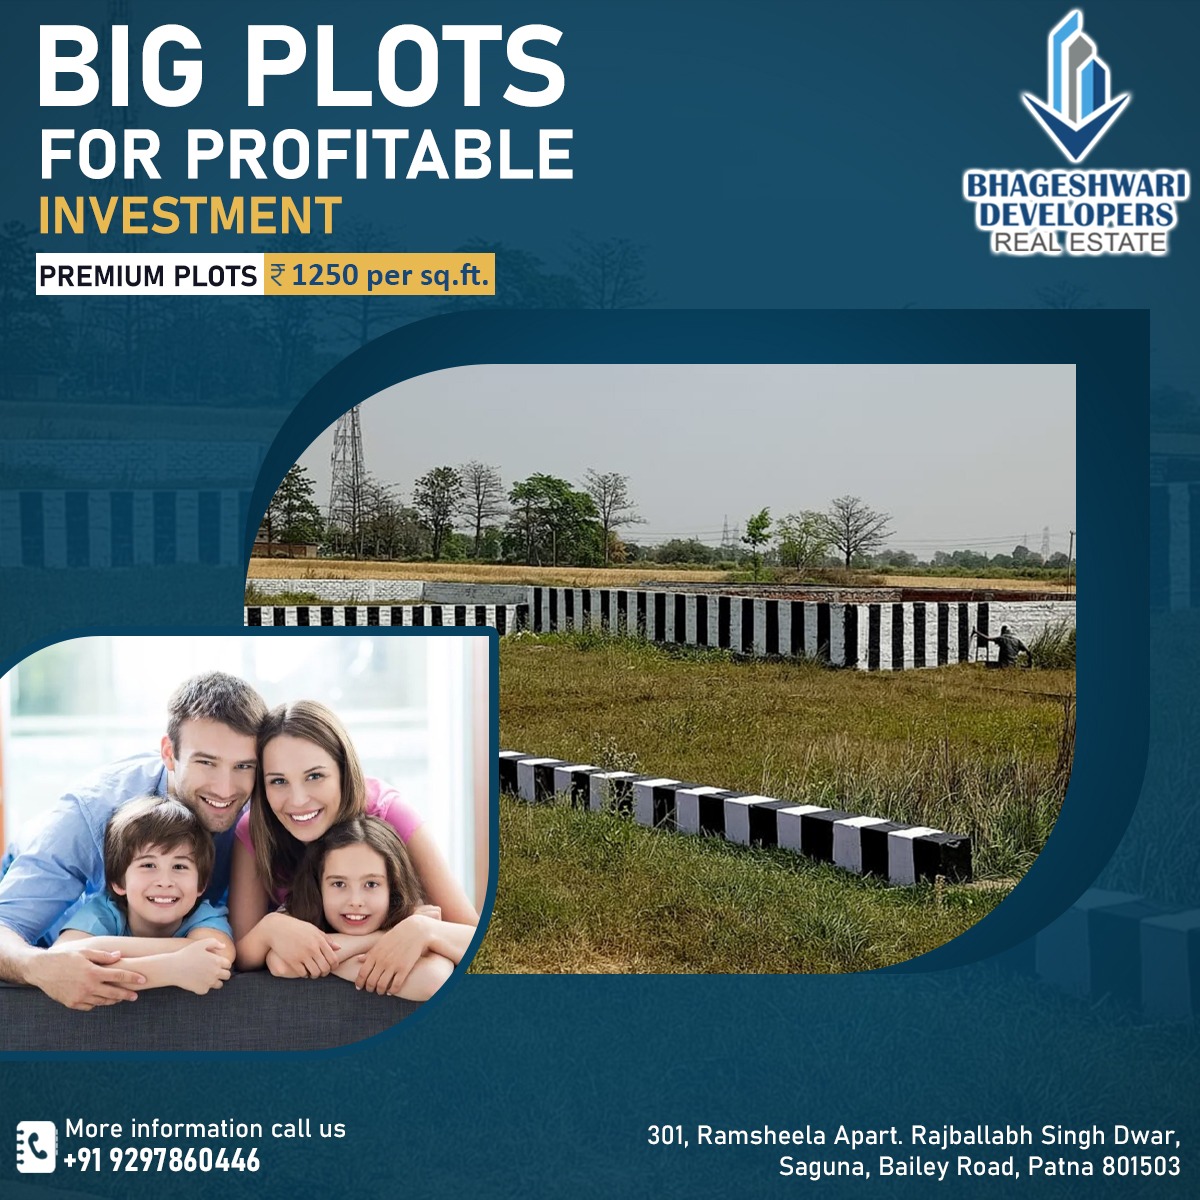 Discover the potential for profitable returns today. 🏞️💰 #RealEstateInvesting #ProfitablePlots 

Contact us now at +91 9297860446
Visit at bhageshwaridevelopers.com

#Bhageshwaridevelopers #plot #LandPlotsForSale #InvestInYourFuture #DreamPlot #InvestSmart #homes #patna #Bihar